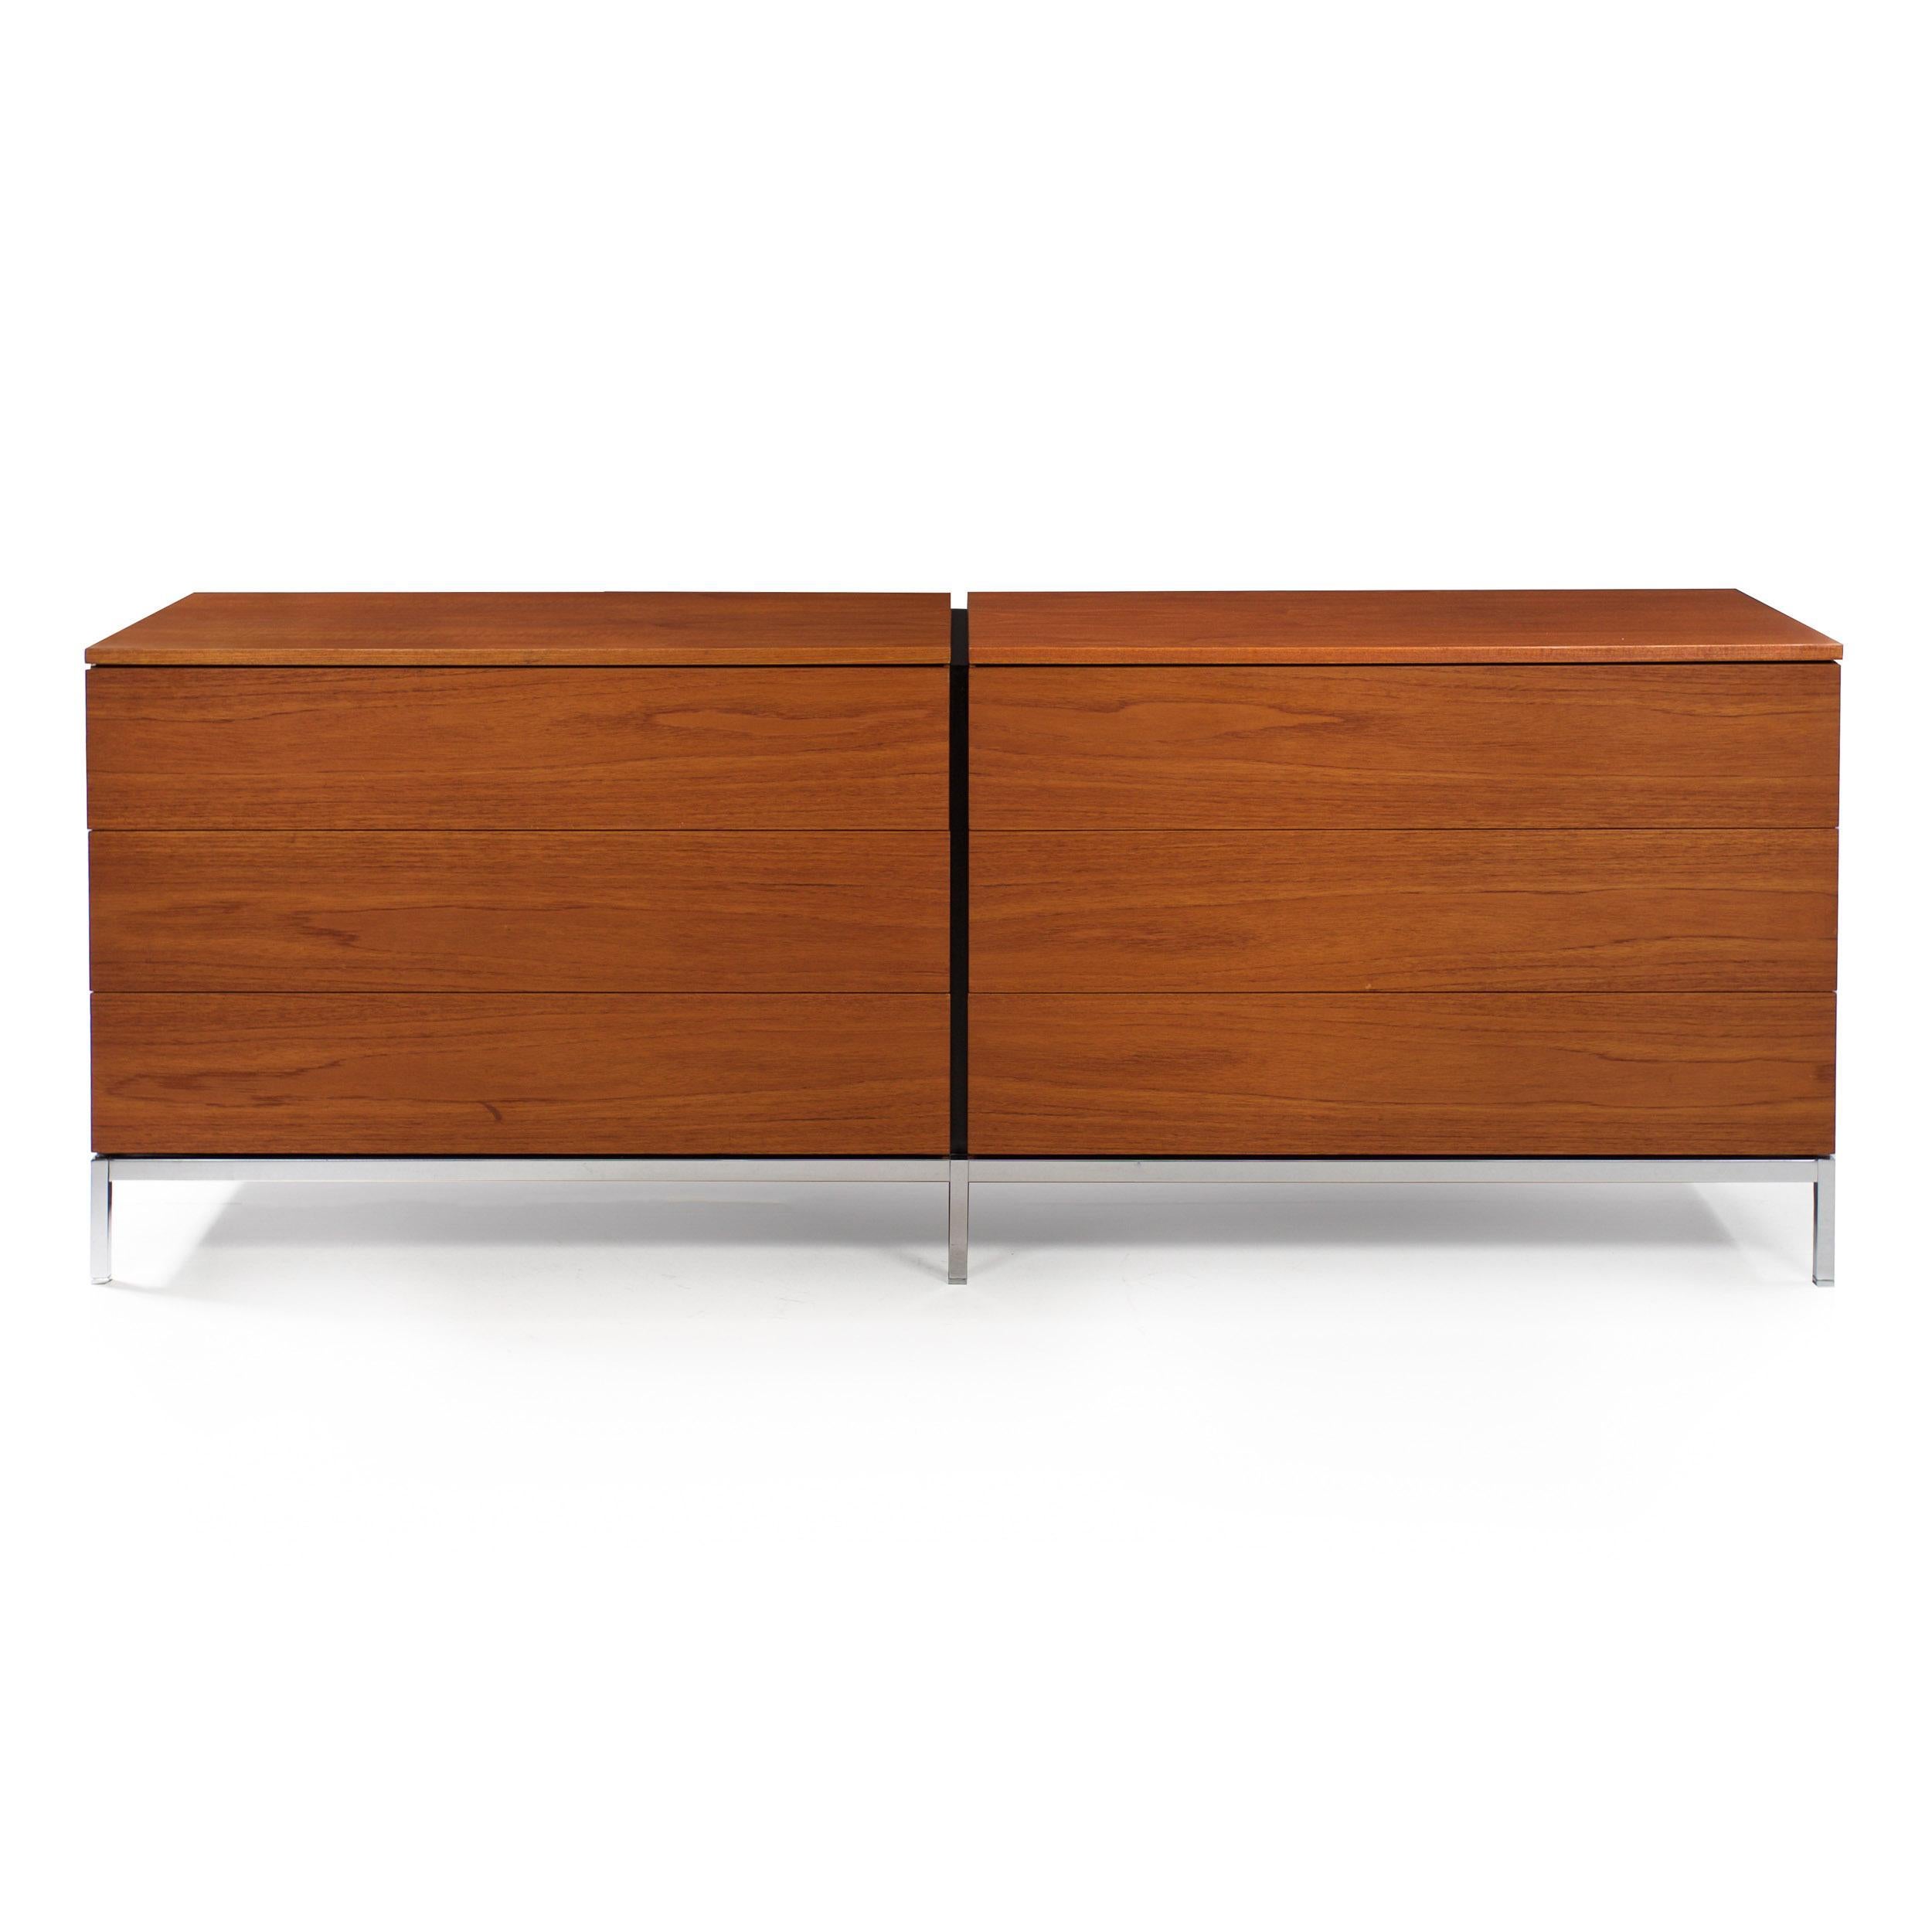 KNOLL TEAK AND CHROME DOUBLE CHEST CREDENZA
Stamp dated 